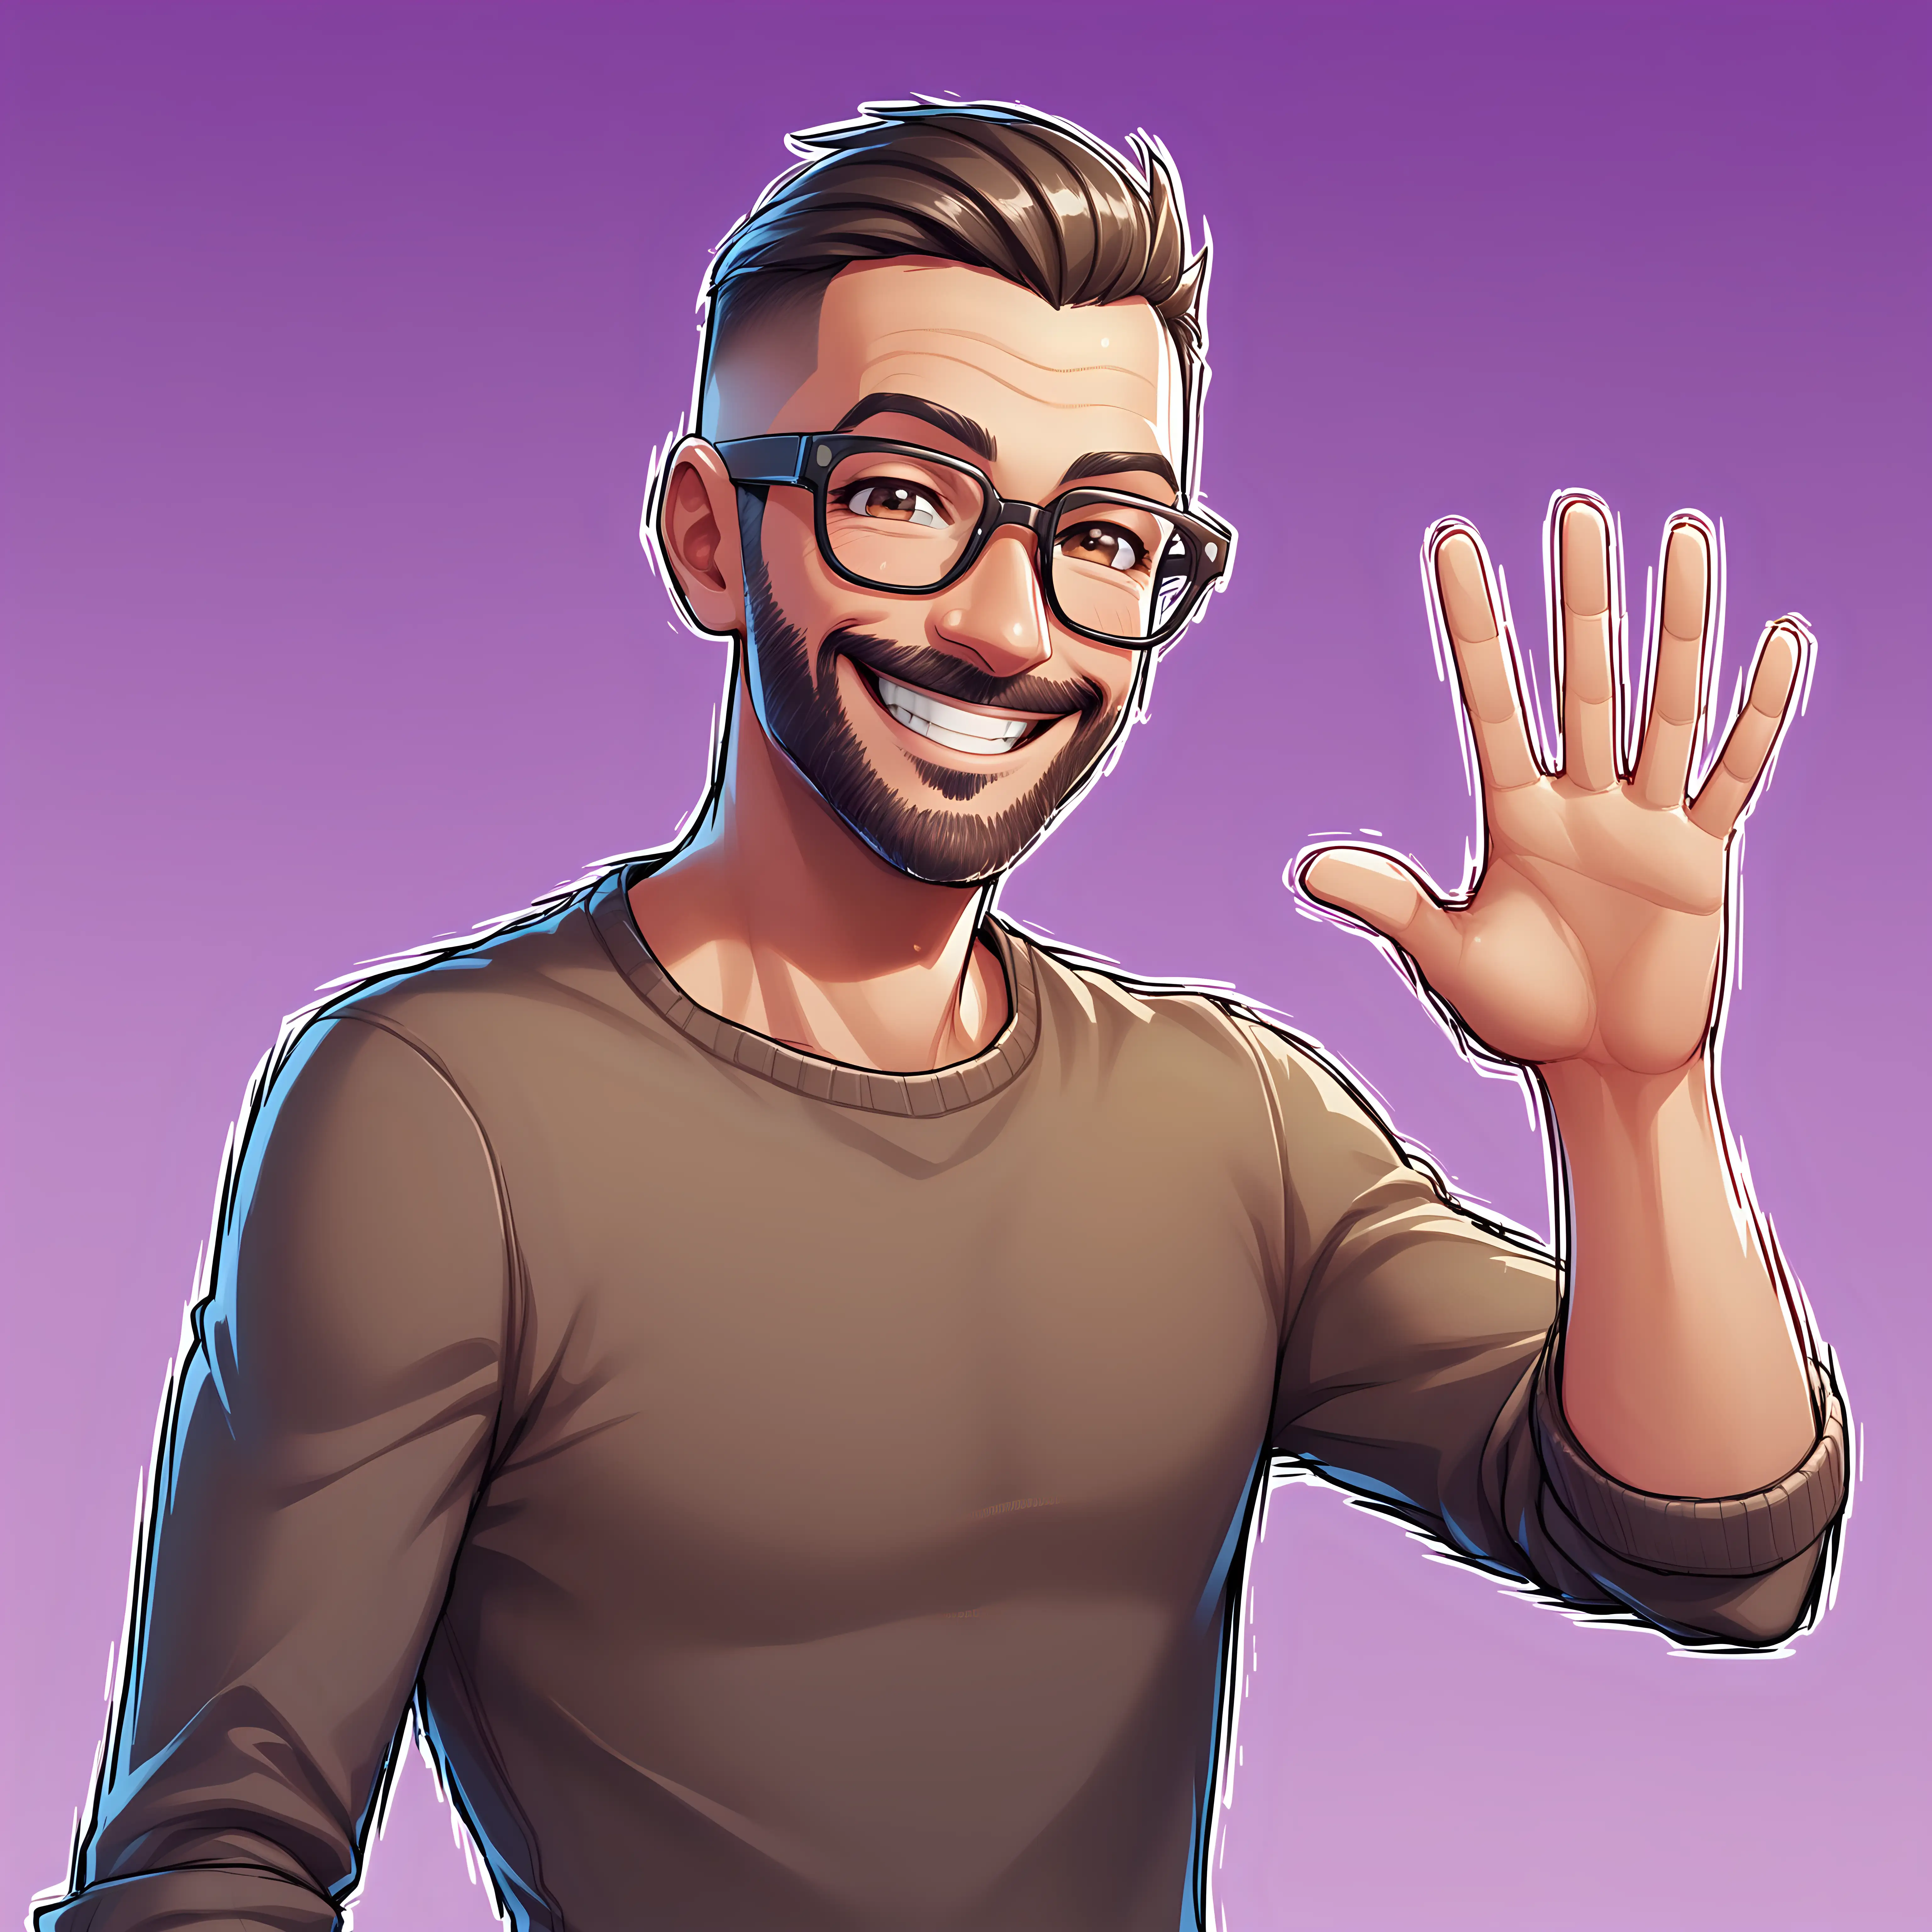 40 year old male fully casually clothed skinny Fortnite character waving and smiling, he is cleanly shaved, no background, he has glasses

